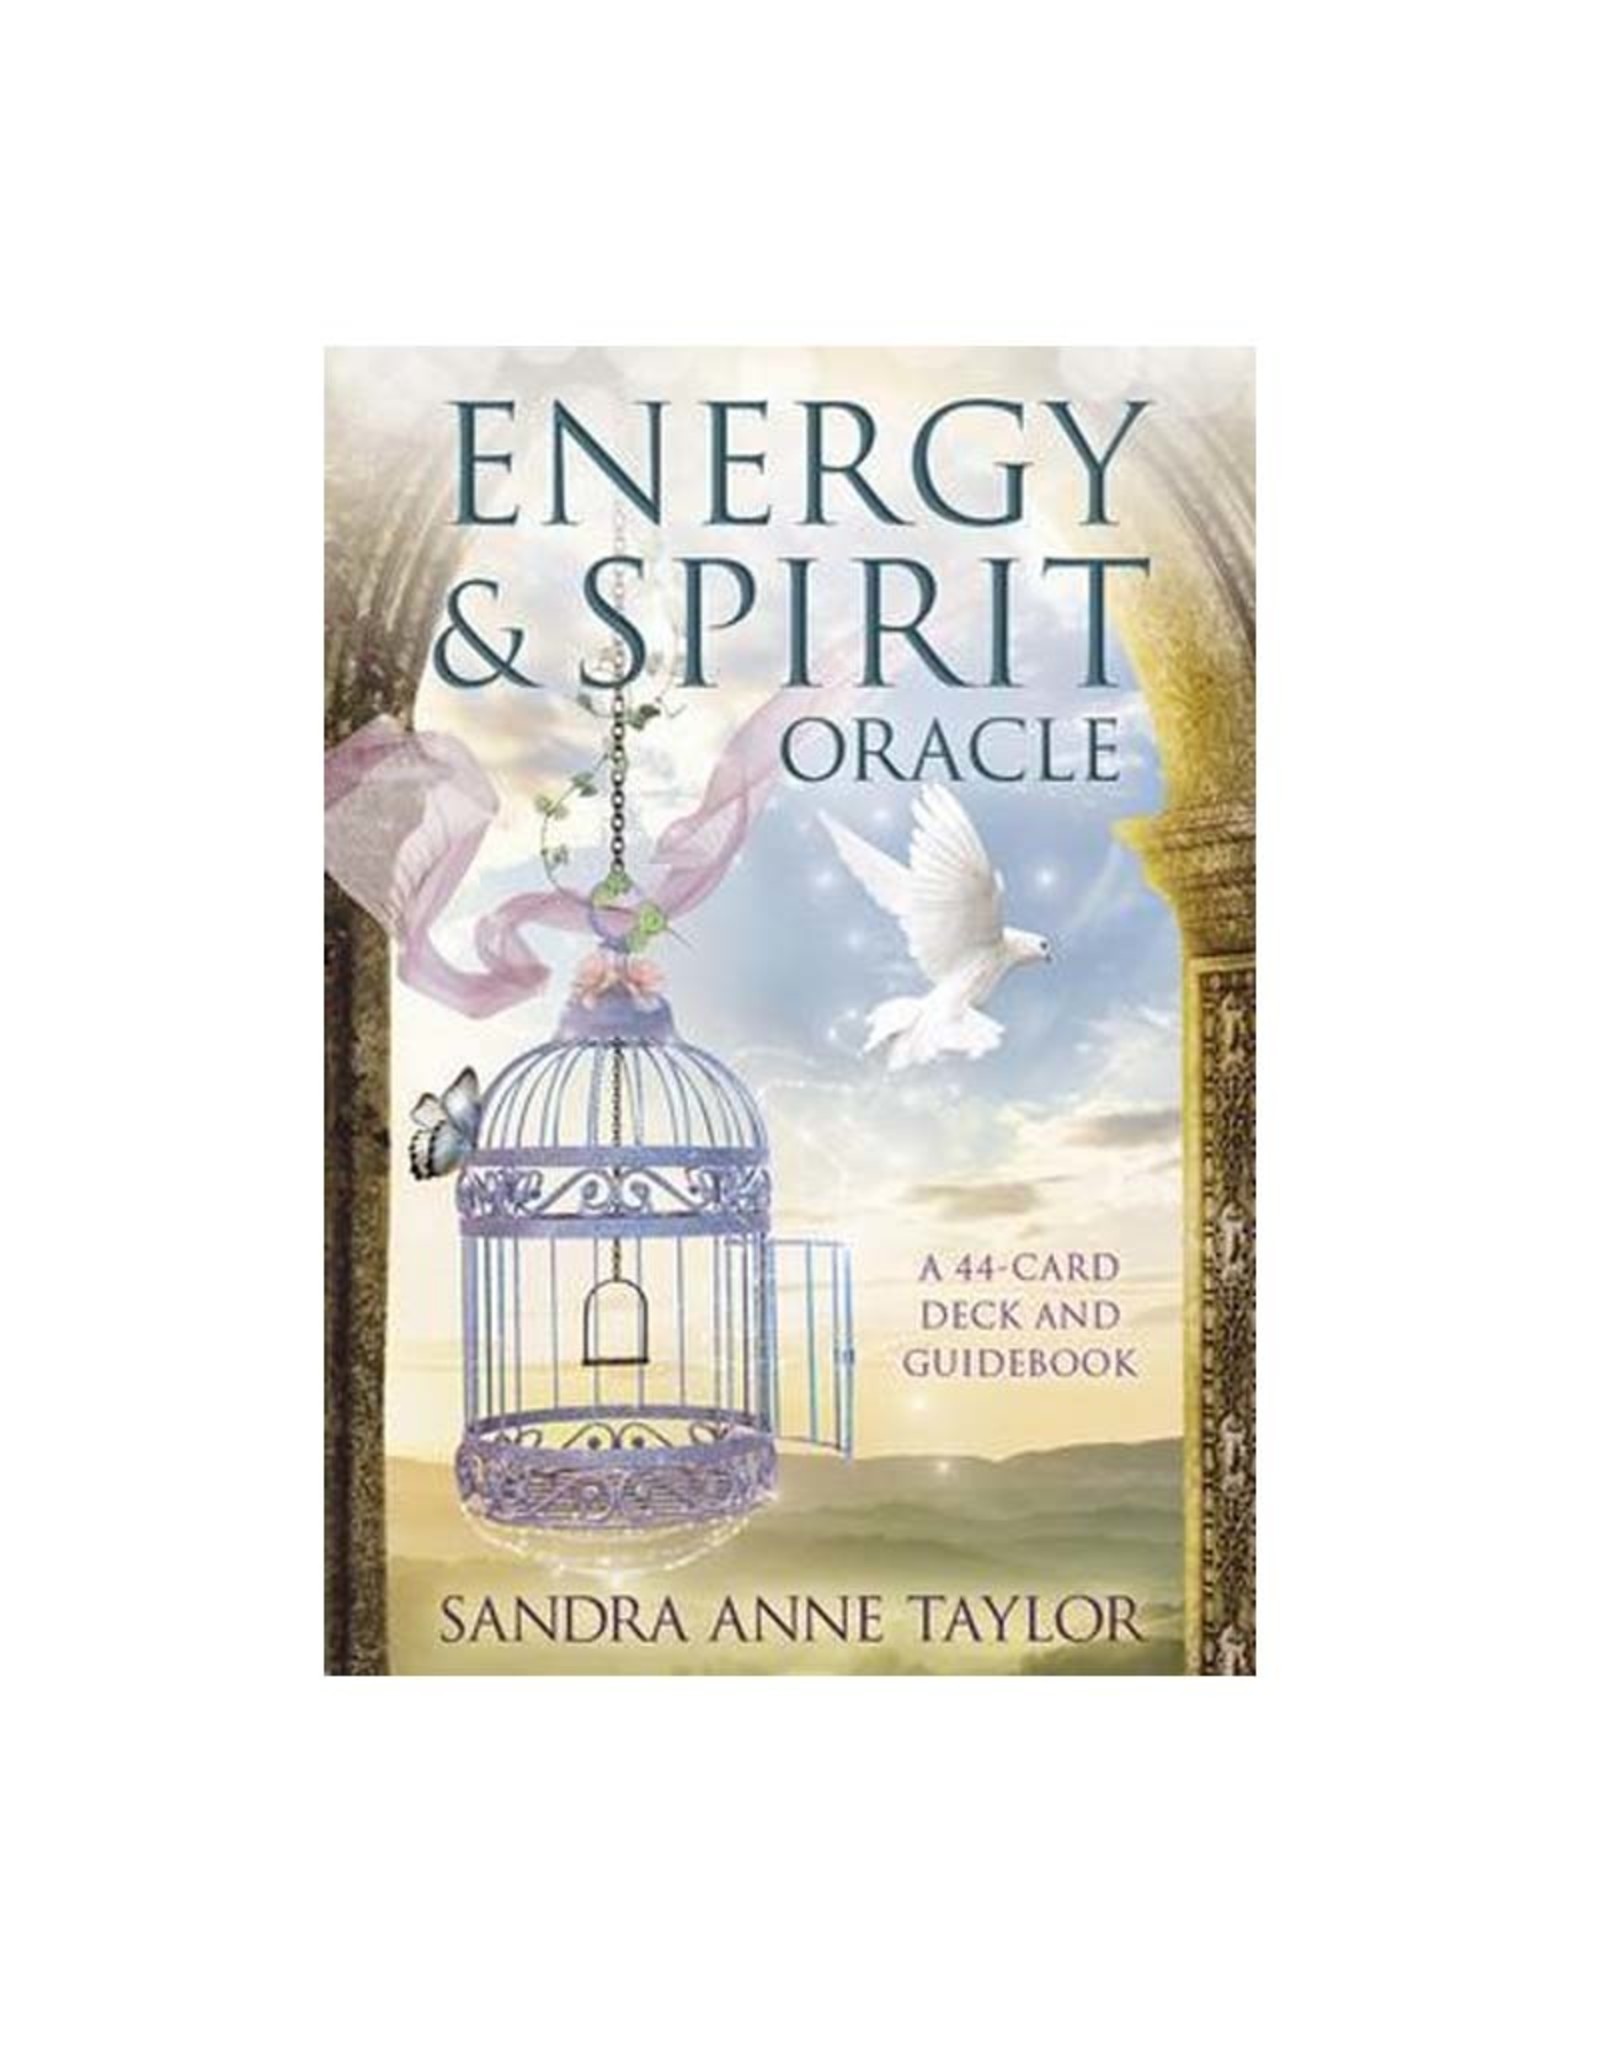 Energy and Spirit Oracle by Sandra Anne Taylor